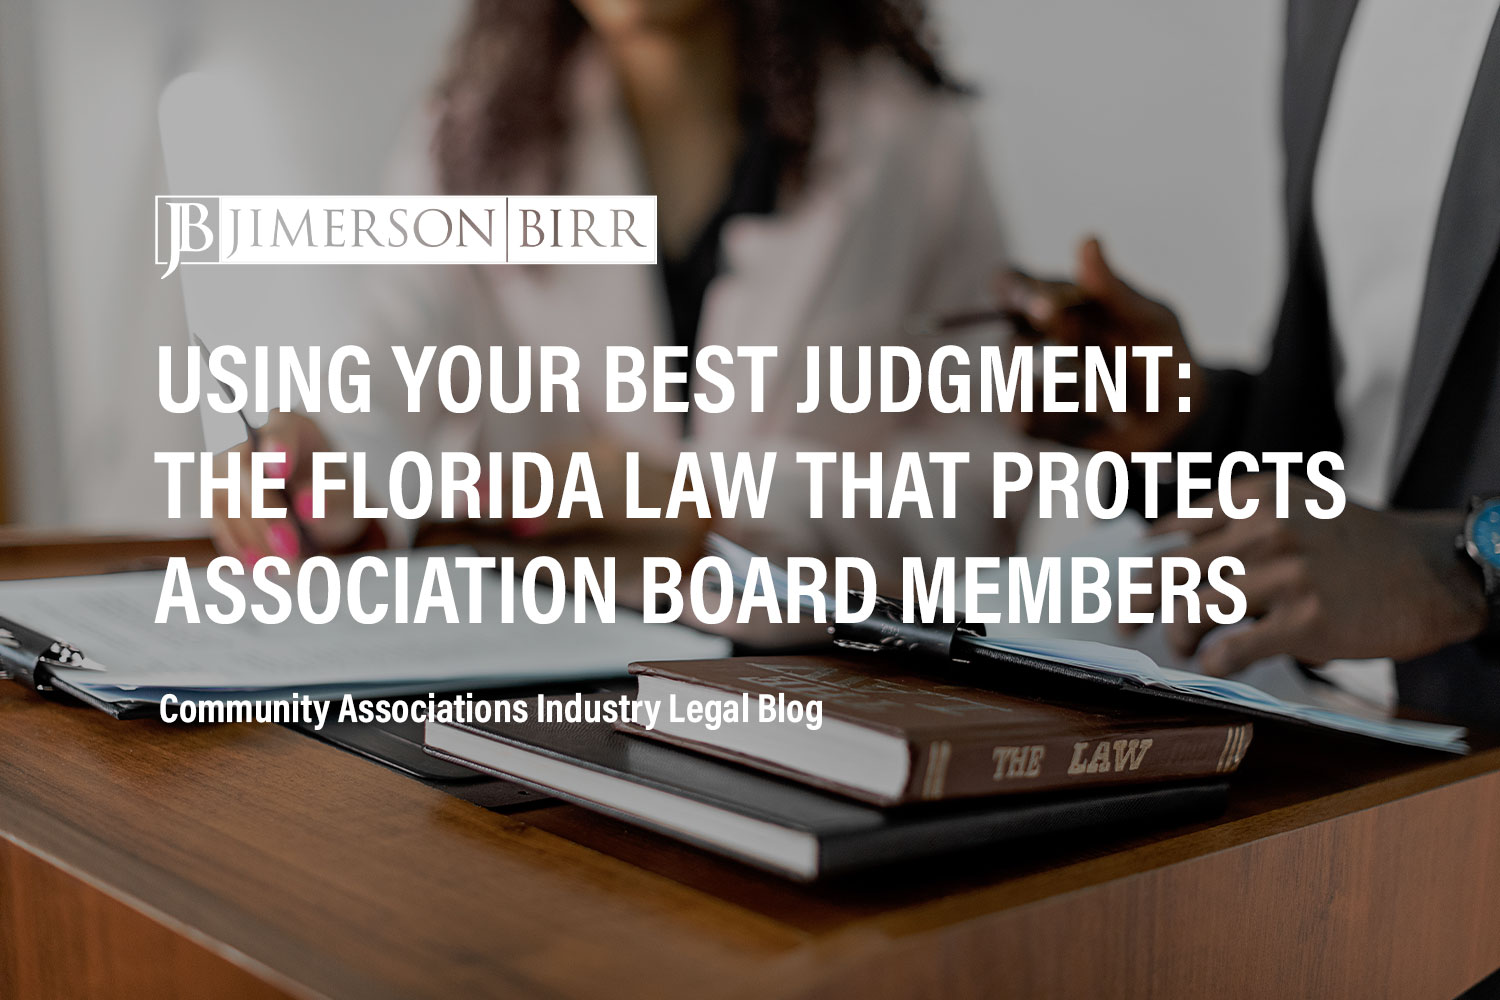 Condominium Board Members: The Business Judgment Rule and Its Protections